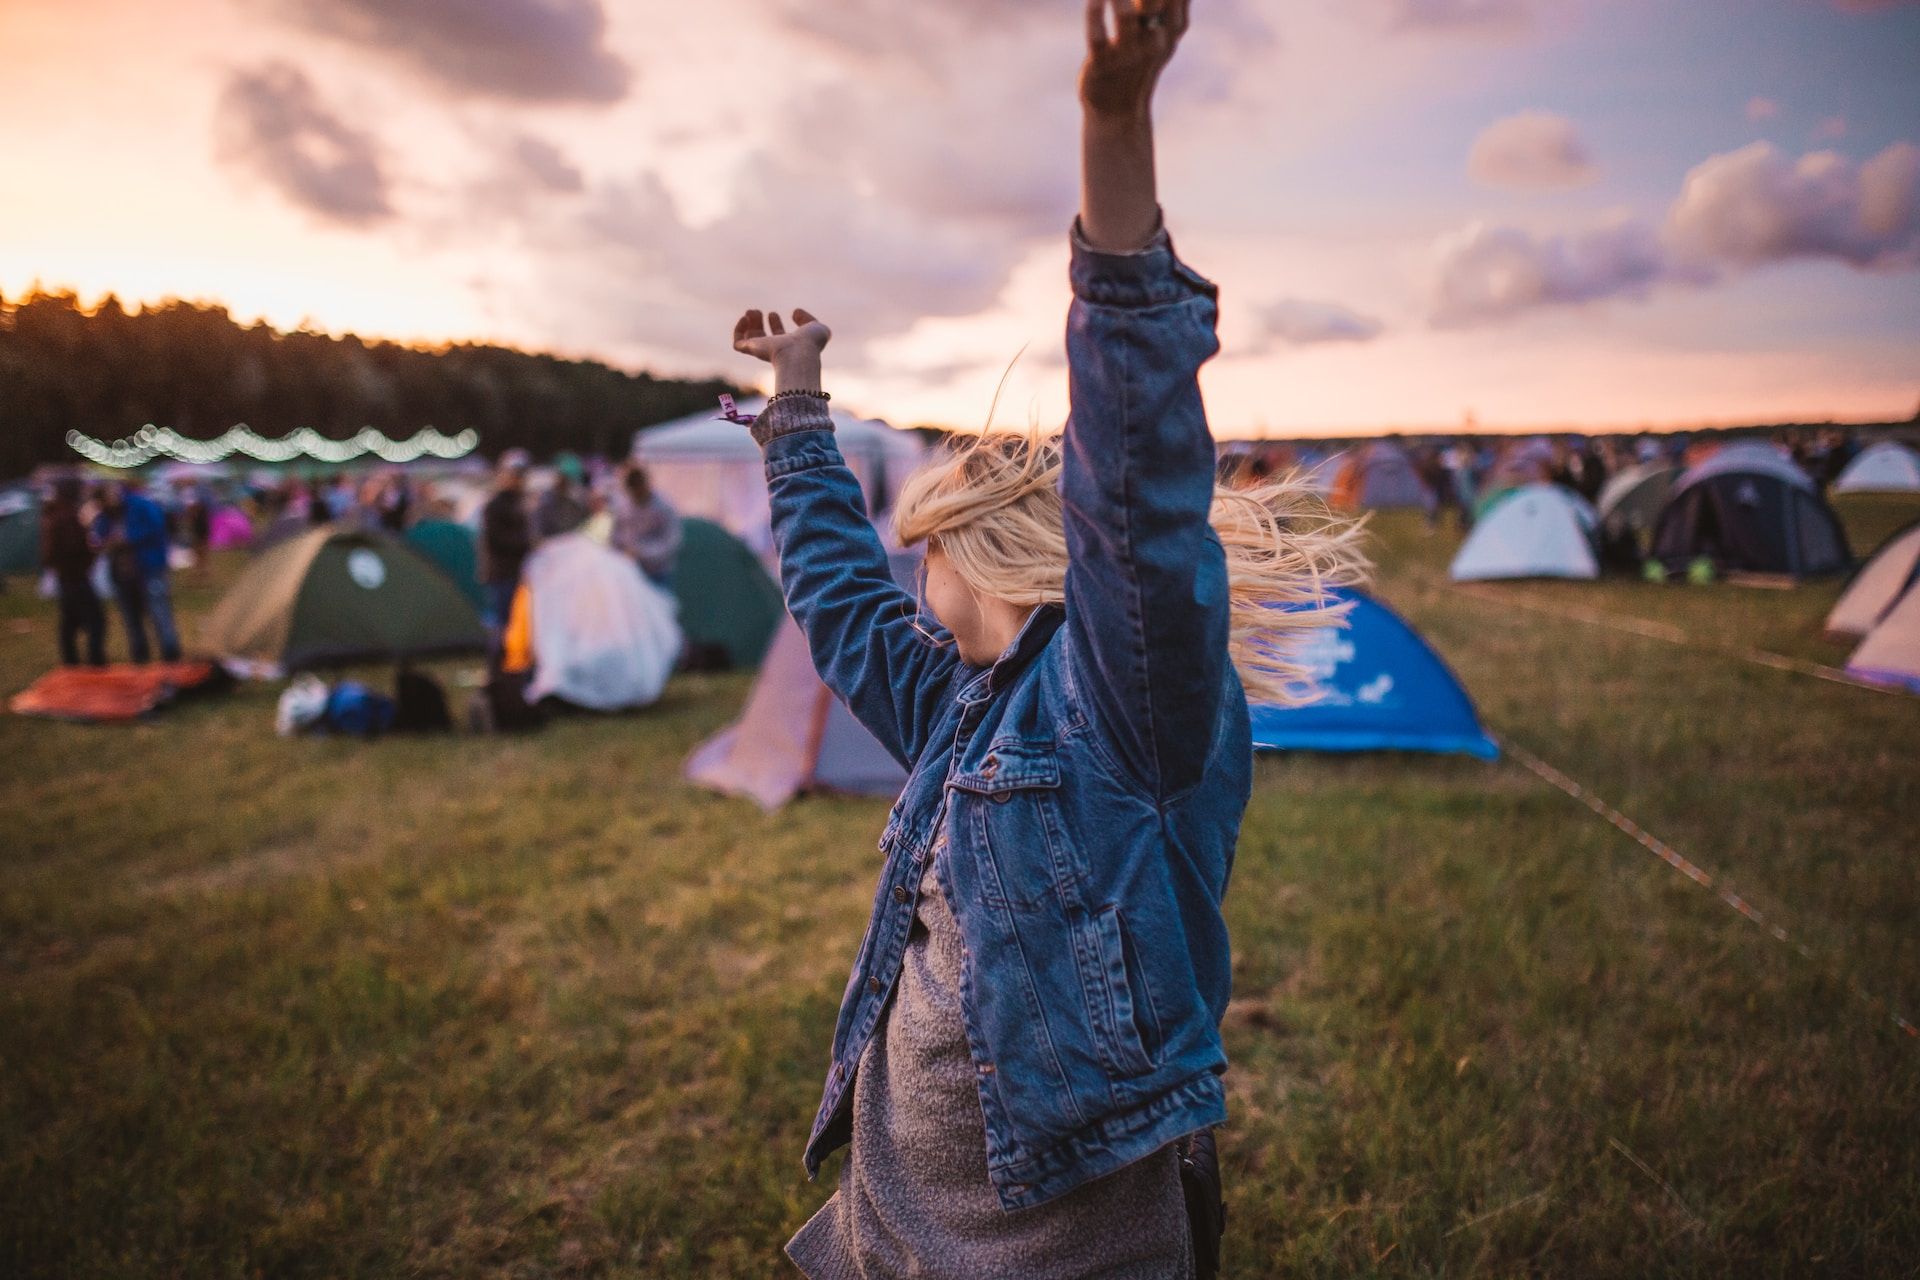 person dancing in front of tents at a festival